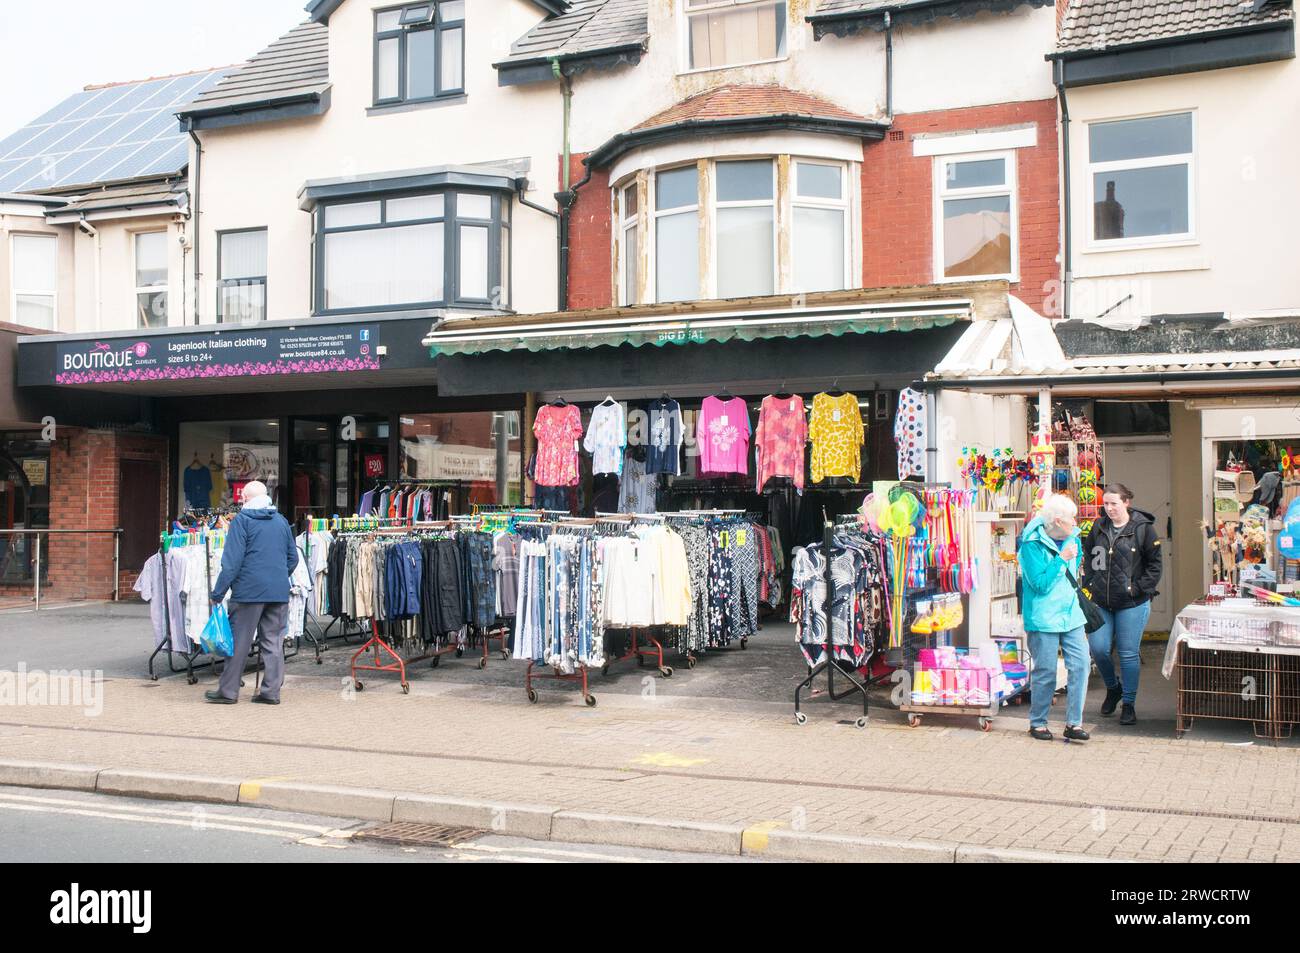 Shirts and other clothing on display for sale outdoor on pedestrian area outside shop in Cleveleys Lancashire England UK Stock Photo